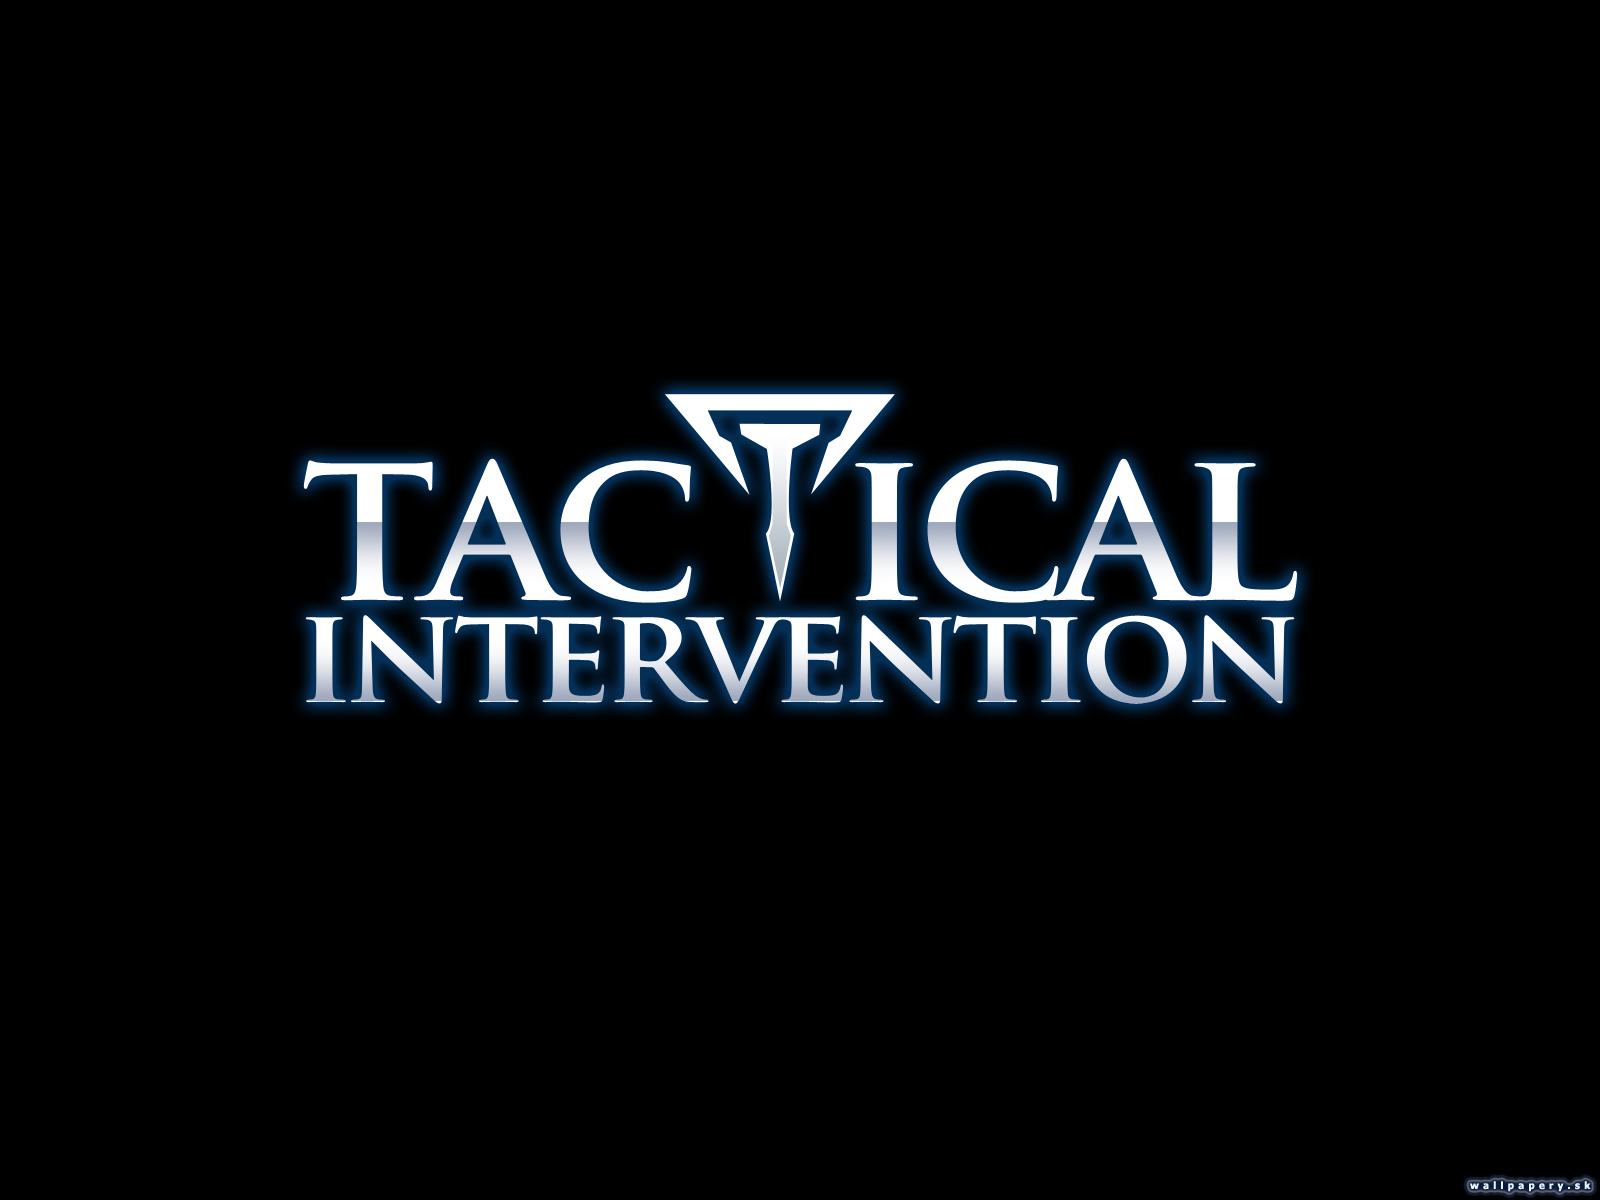 Tactical Intervention - wallpaper 11